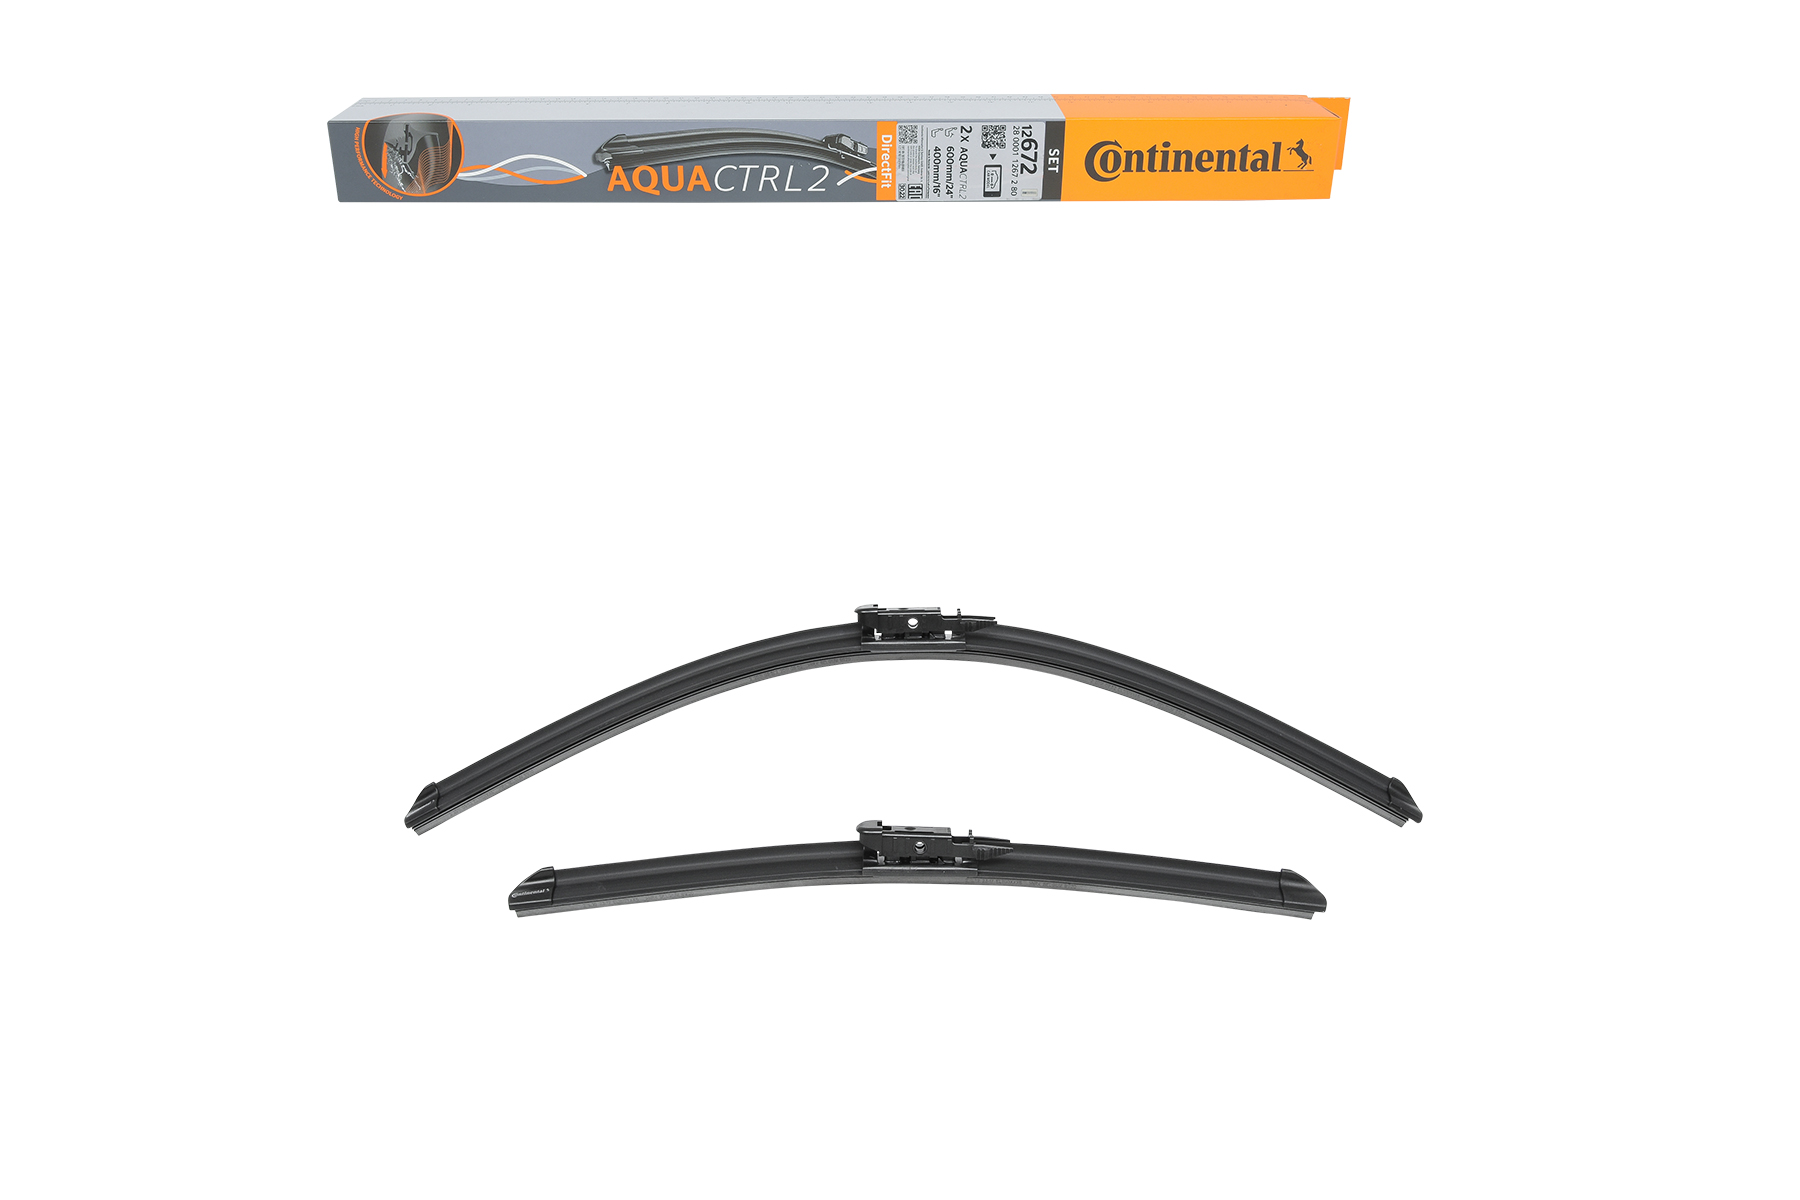 Original Continental 12672 Windshield wipers 2800011267280 for BMW X1